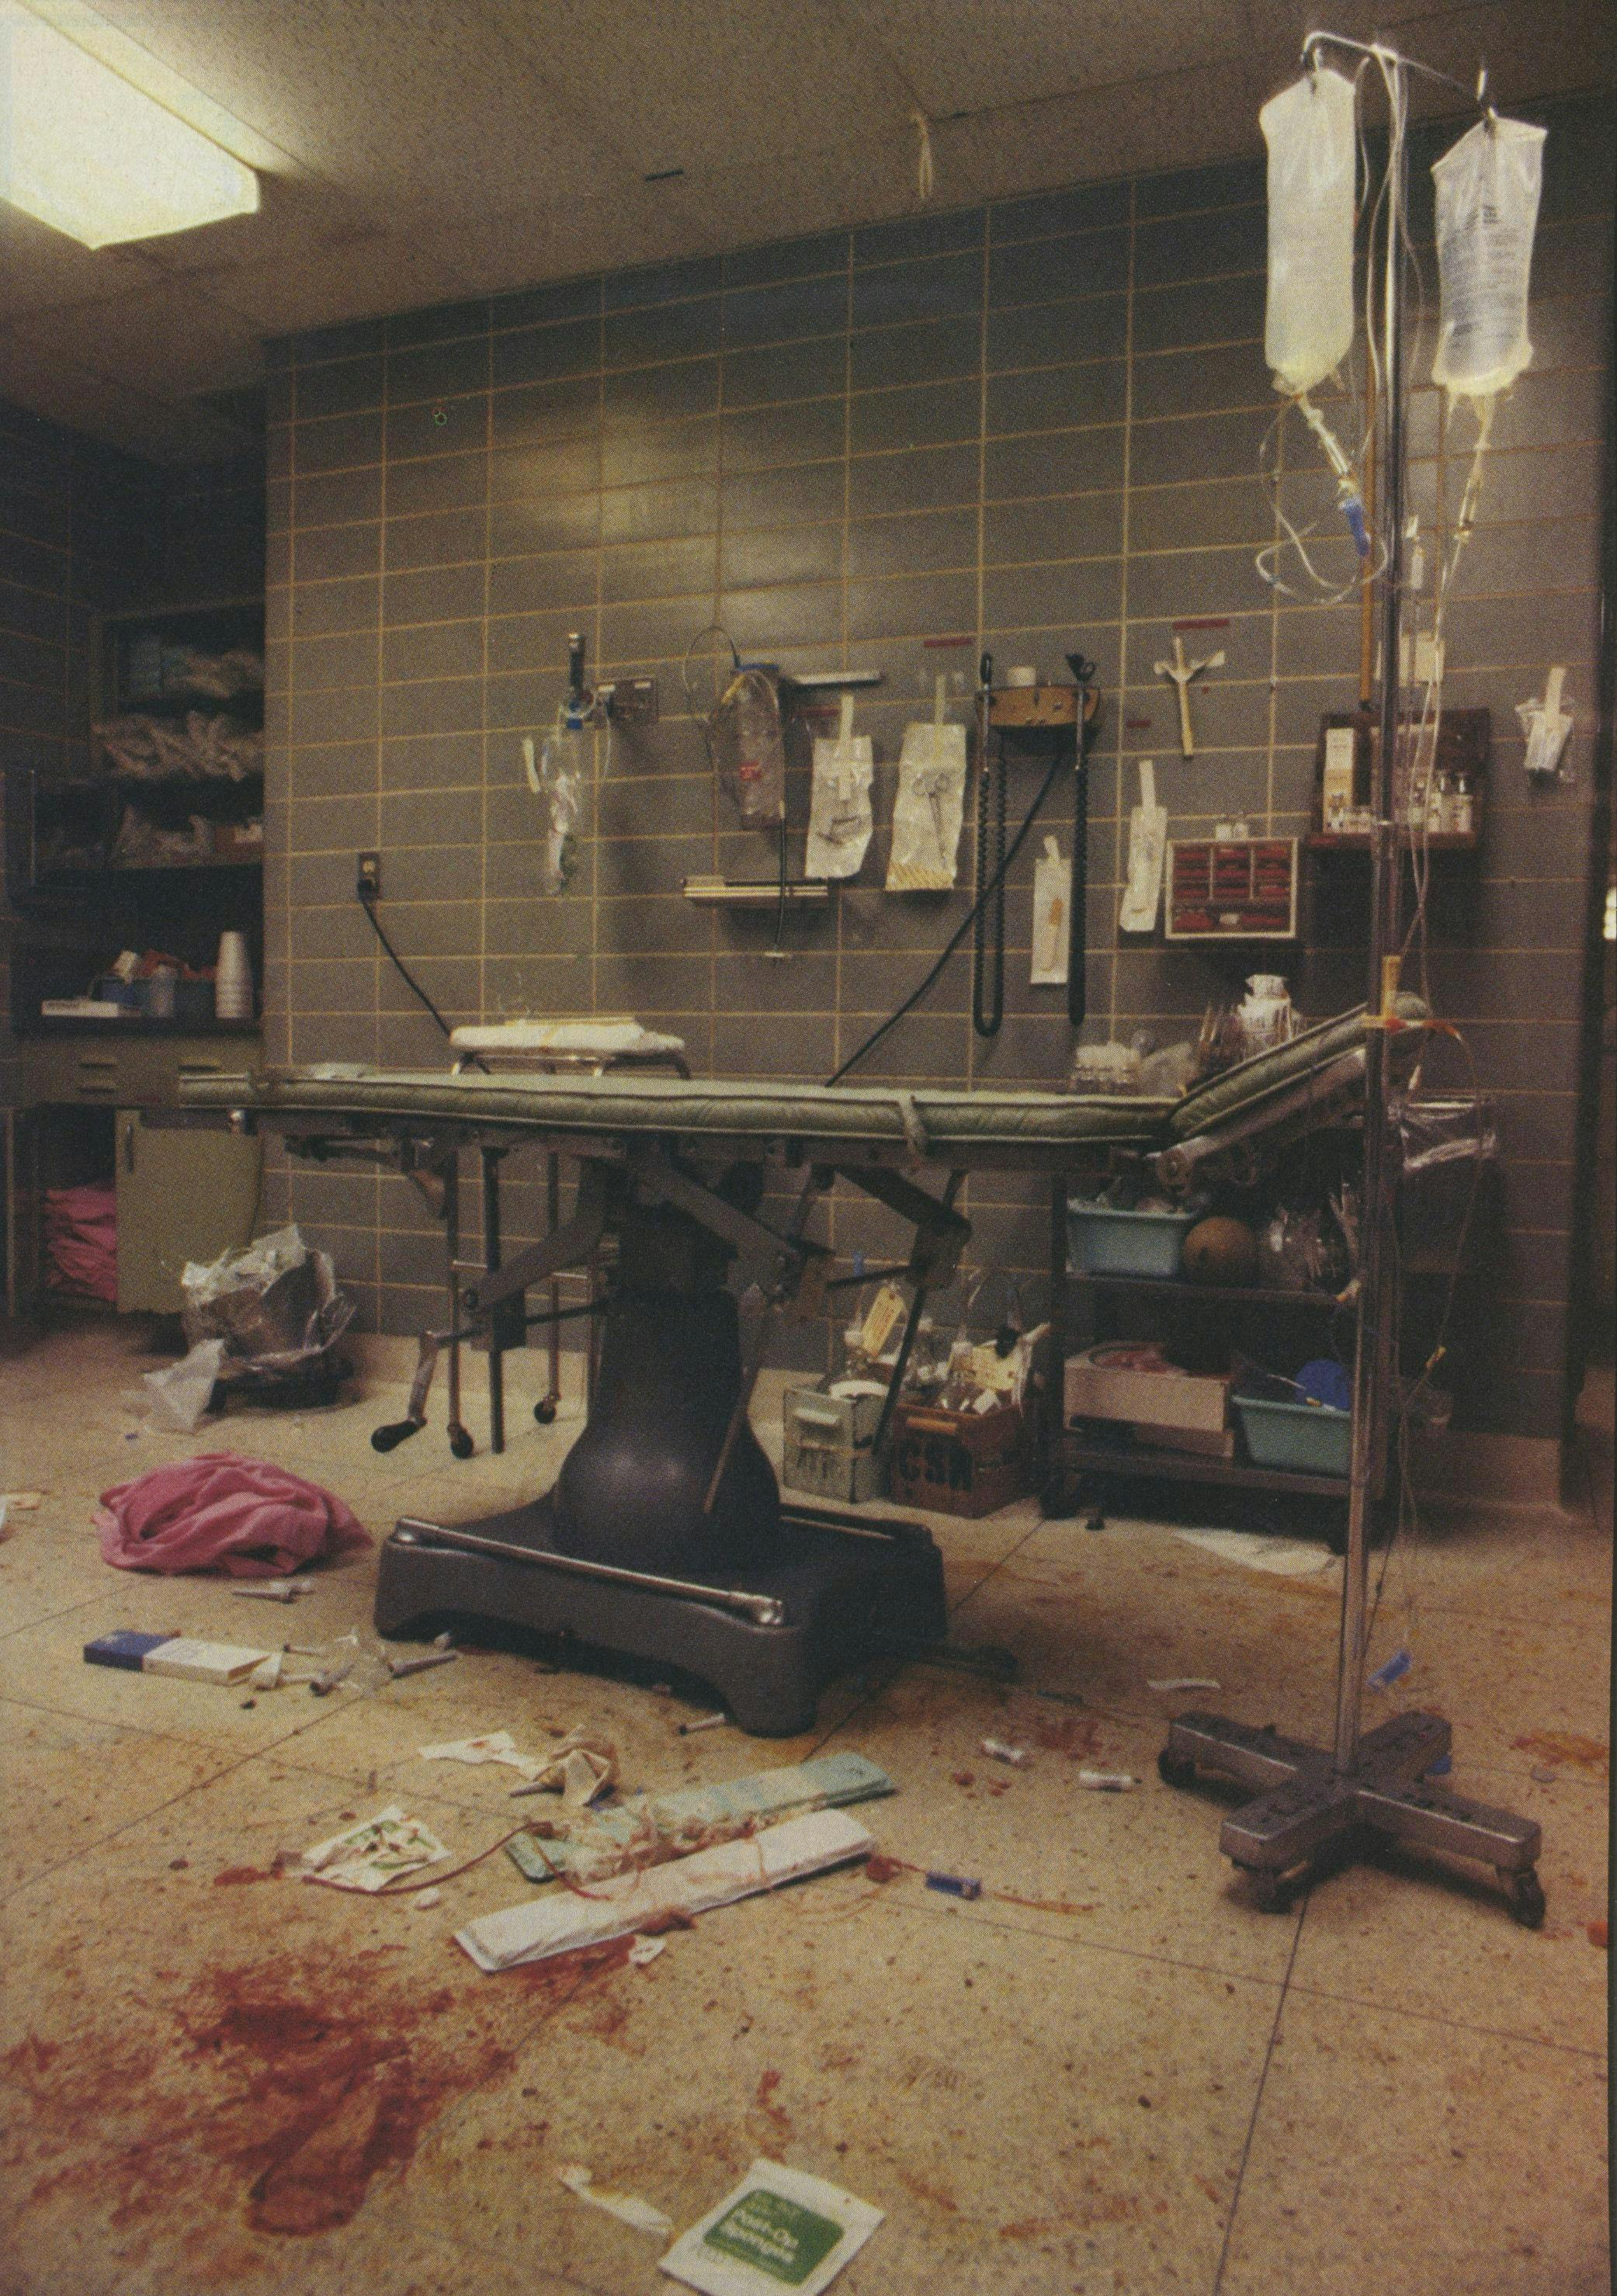 In the aftermath of treatment of an emergency patient, the shock room resembles an abandoned battlefield. This is not the end, however, but a momentary lull in the night's work in this backup room. Within a few minutes, the housekeeping crew will put things back together for the next case.